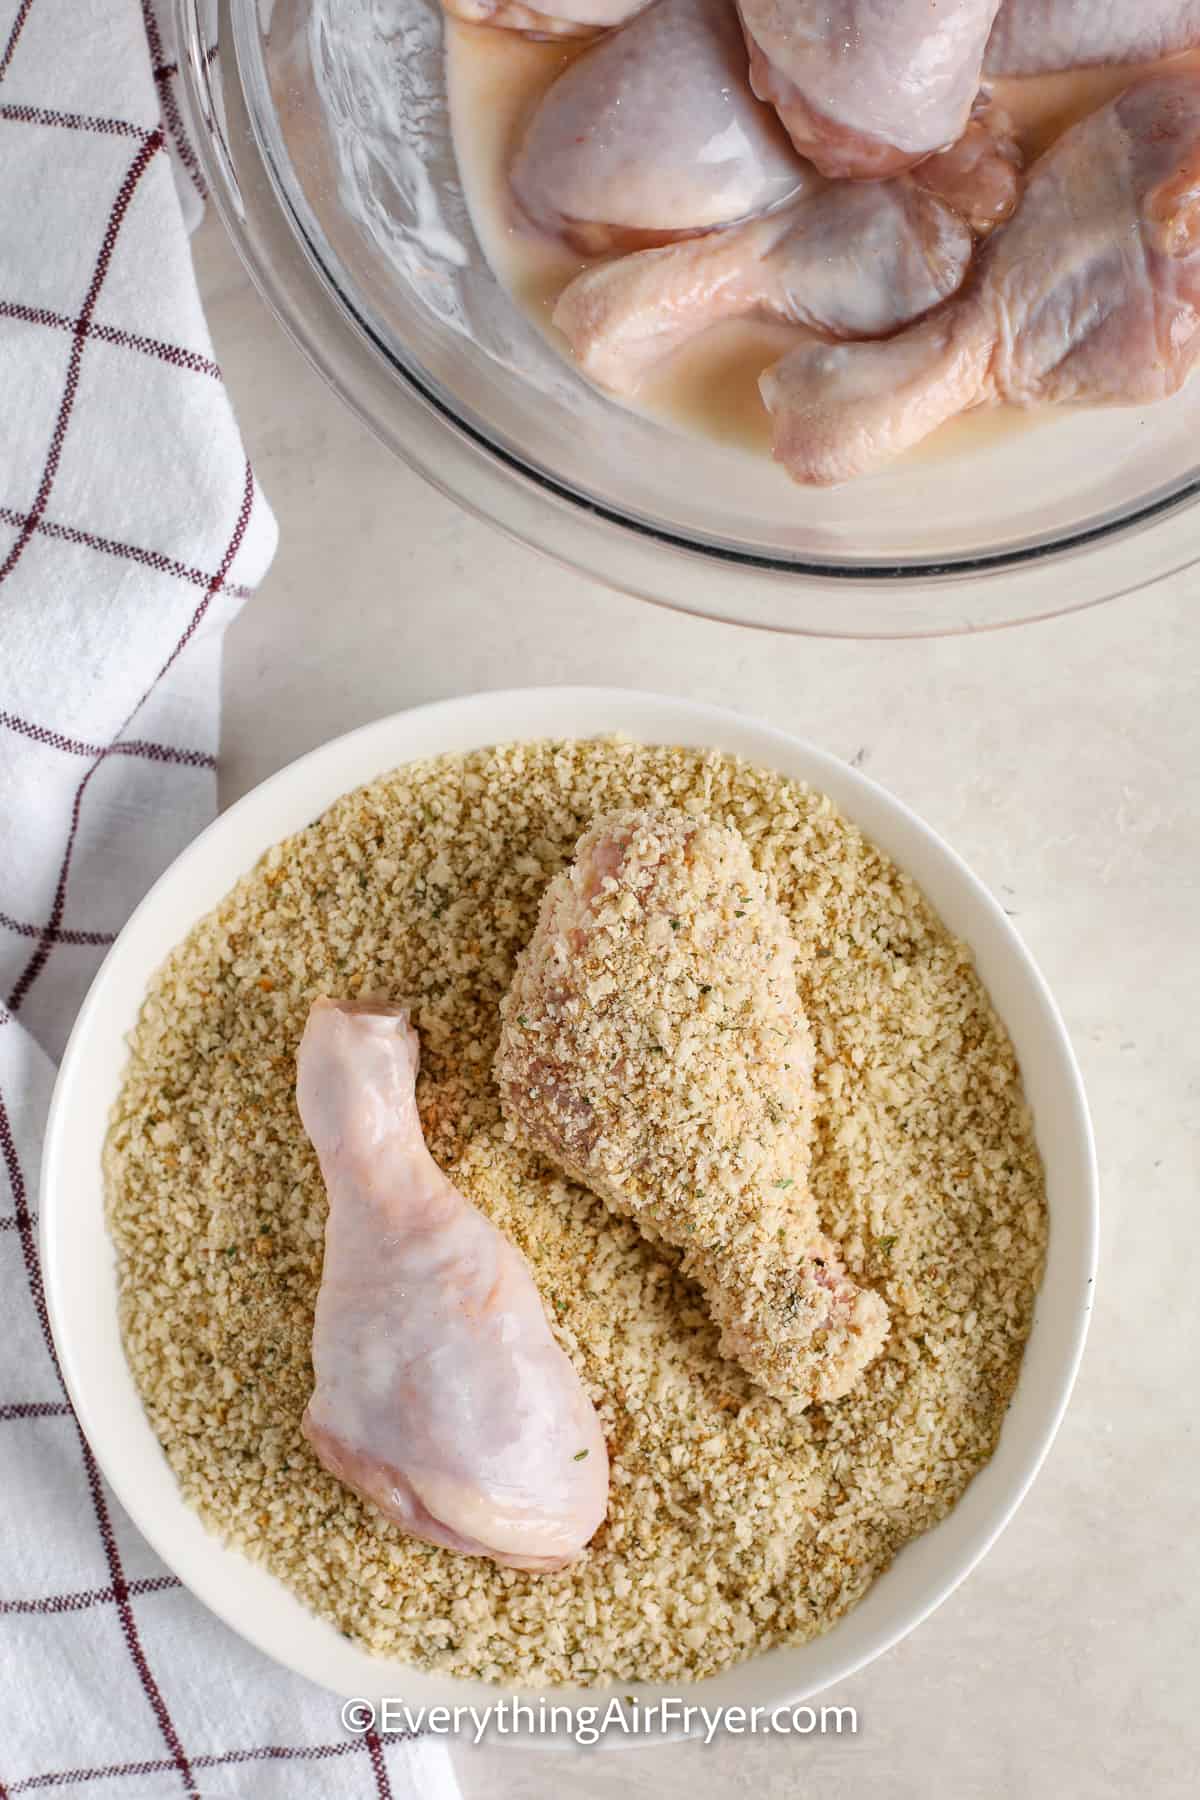 chicken drumsticks being coated with breadcrumbs